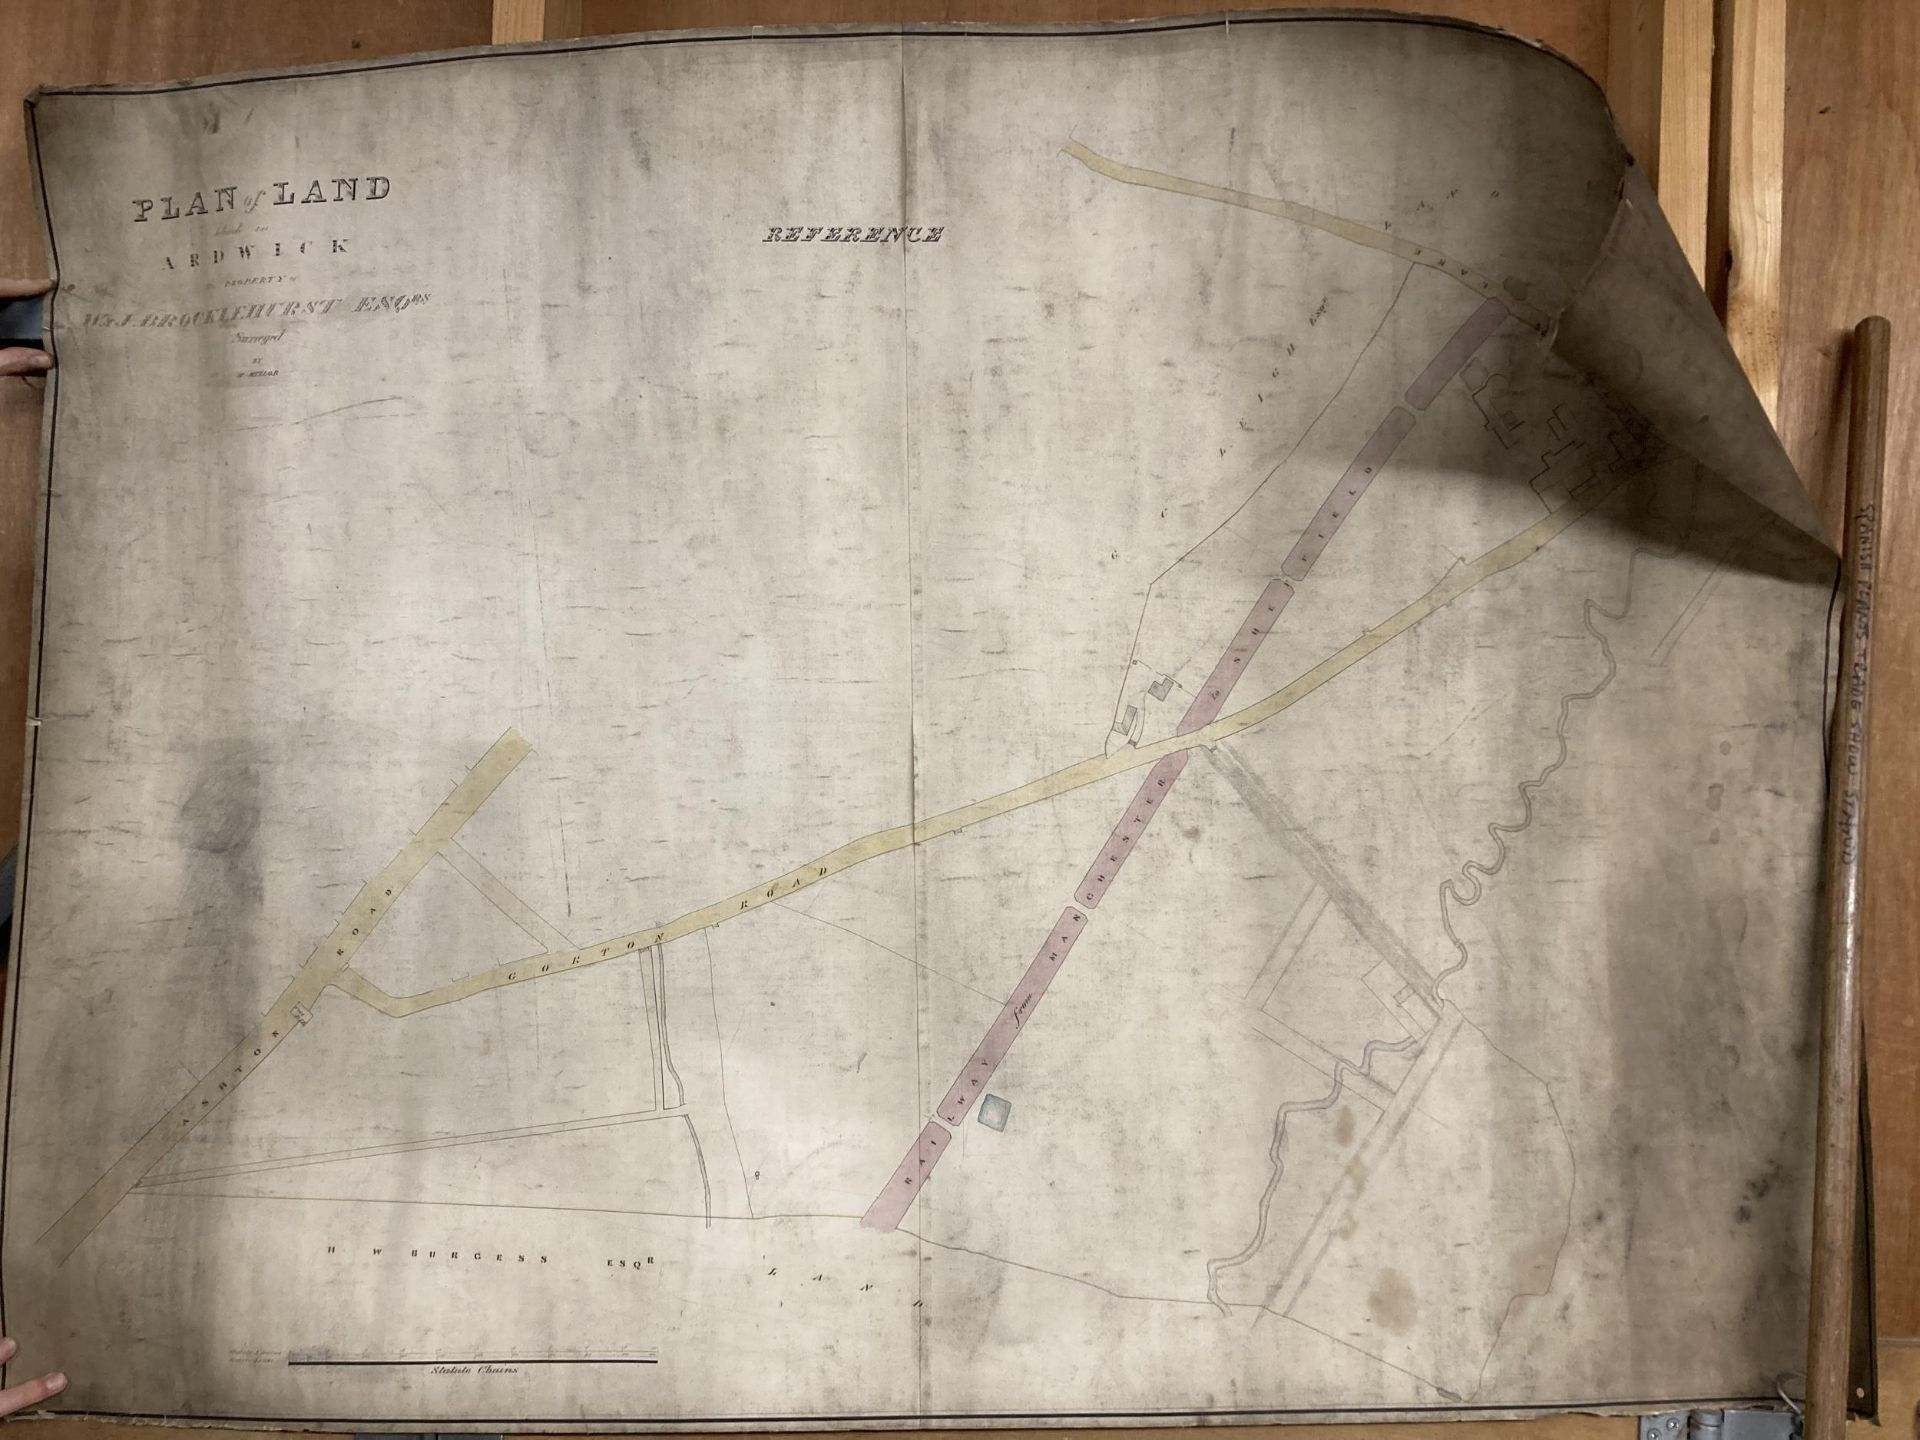 A PLAN OF LAND SITUATE IN ARDWICK BEING THE PROPERTY OF W & J BROCKLEHURST ESQRS SURVEYED BY W